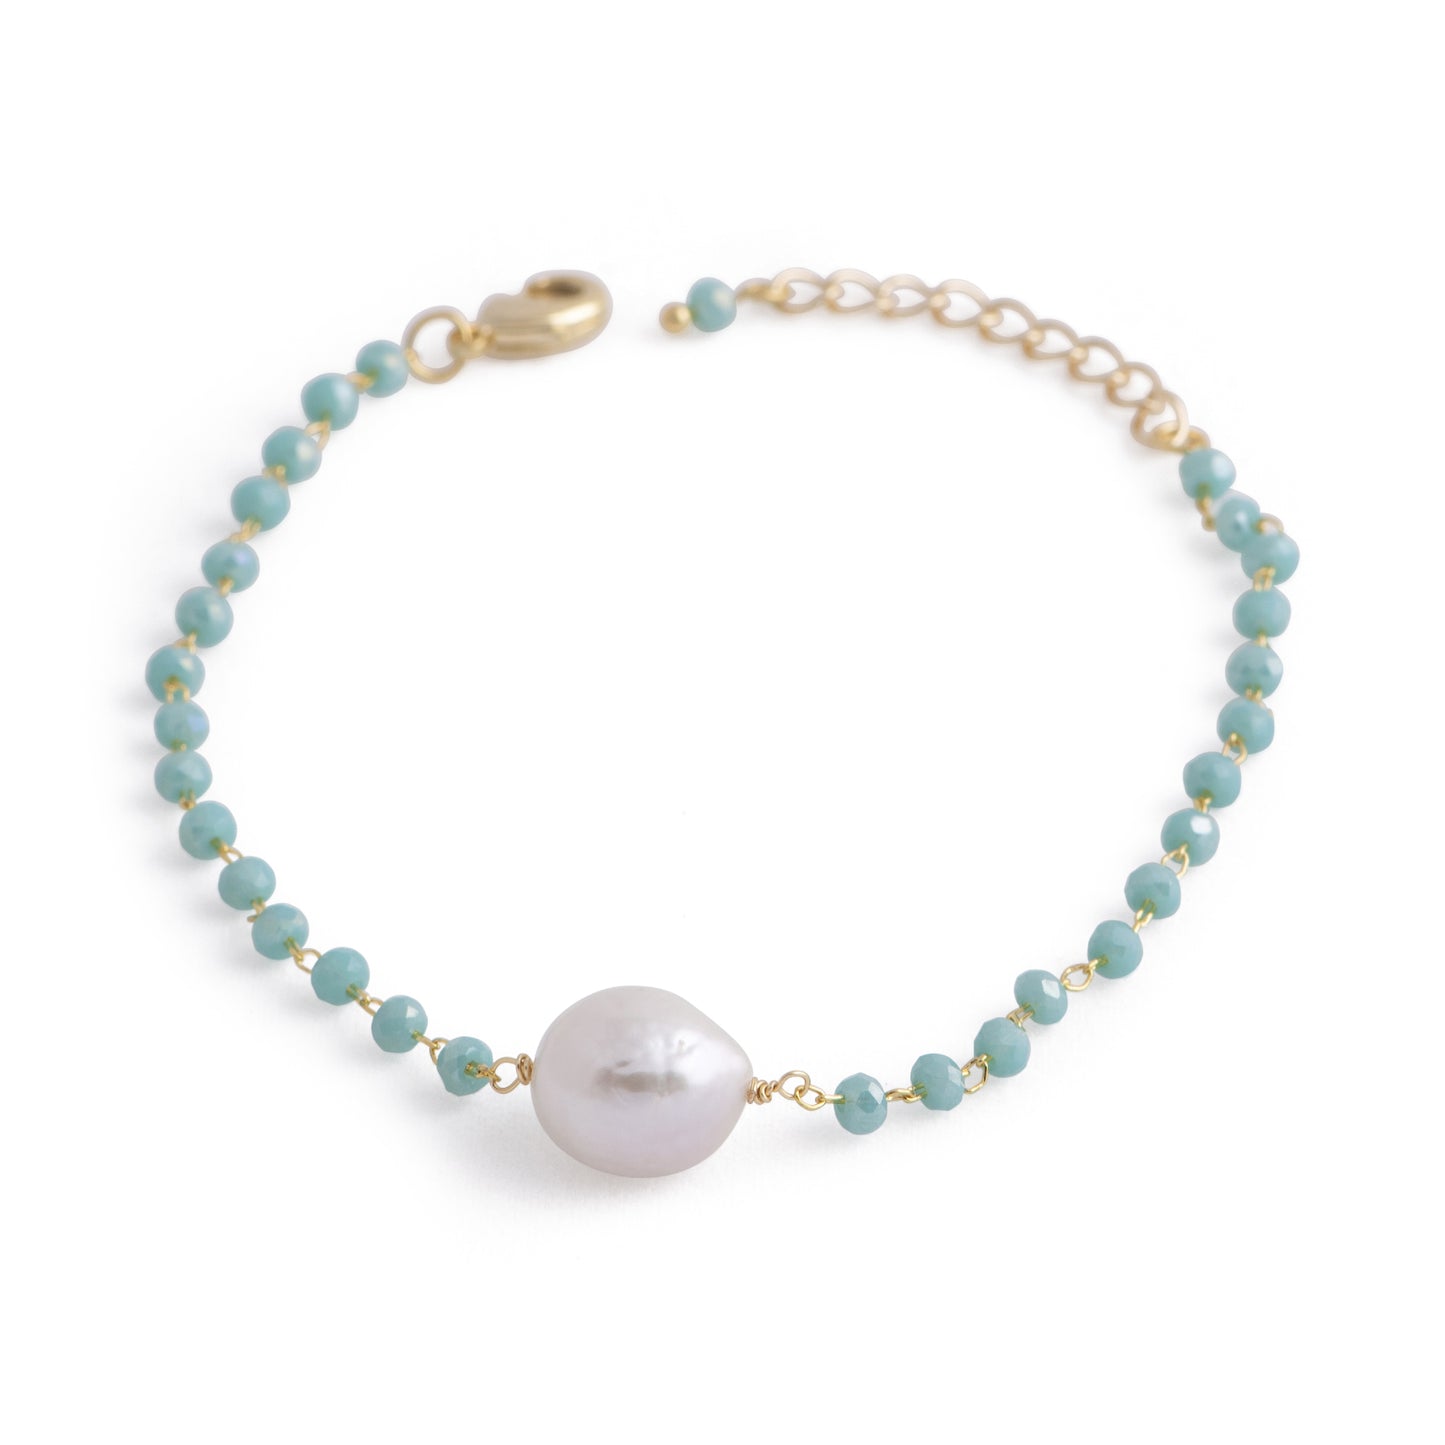 Hudson - Freshwater pearl and crystal bracelet (Turquoise crystals, white pearl)